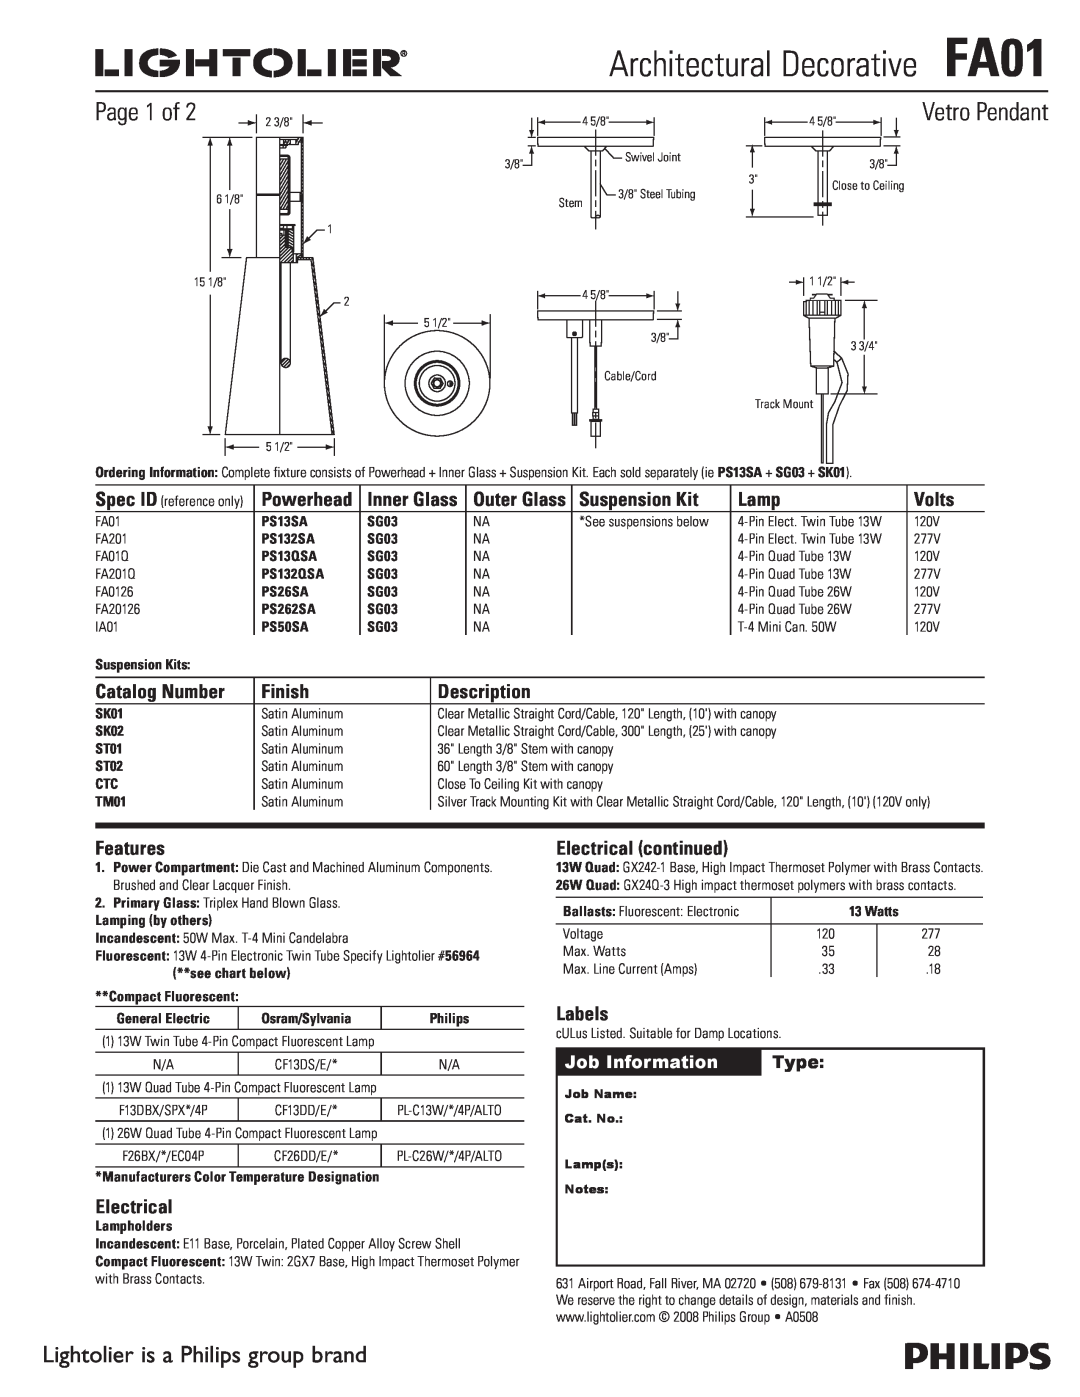 Lightolier manual Page 1 of, Lightolier is a Philips group brand, Architectural DecorativeFA01, Suspension Kit, Lamp 